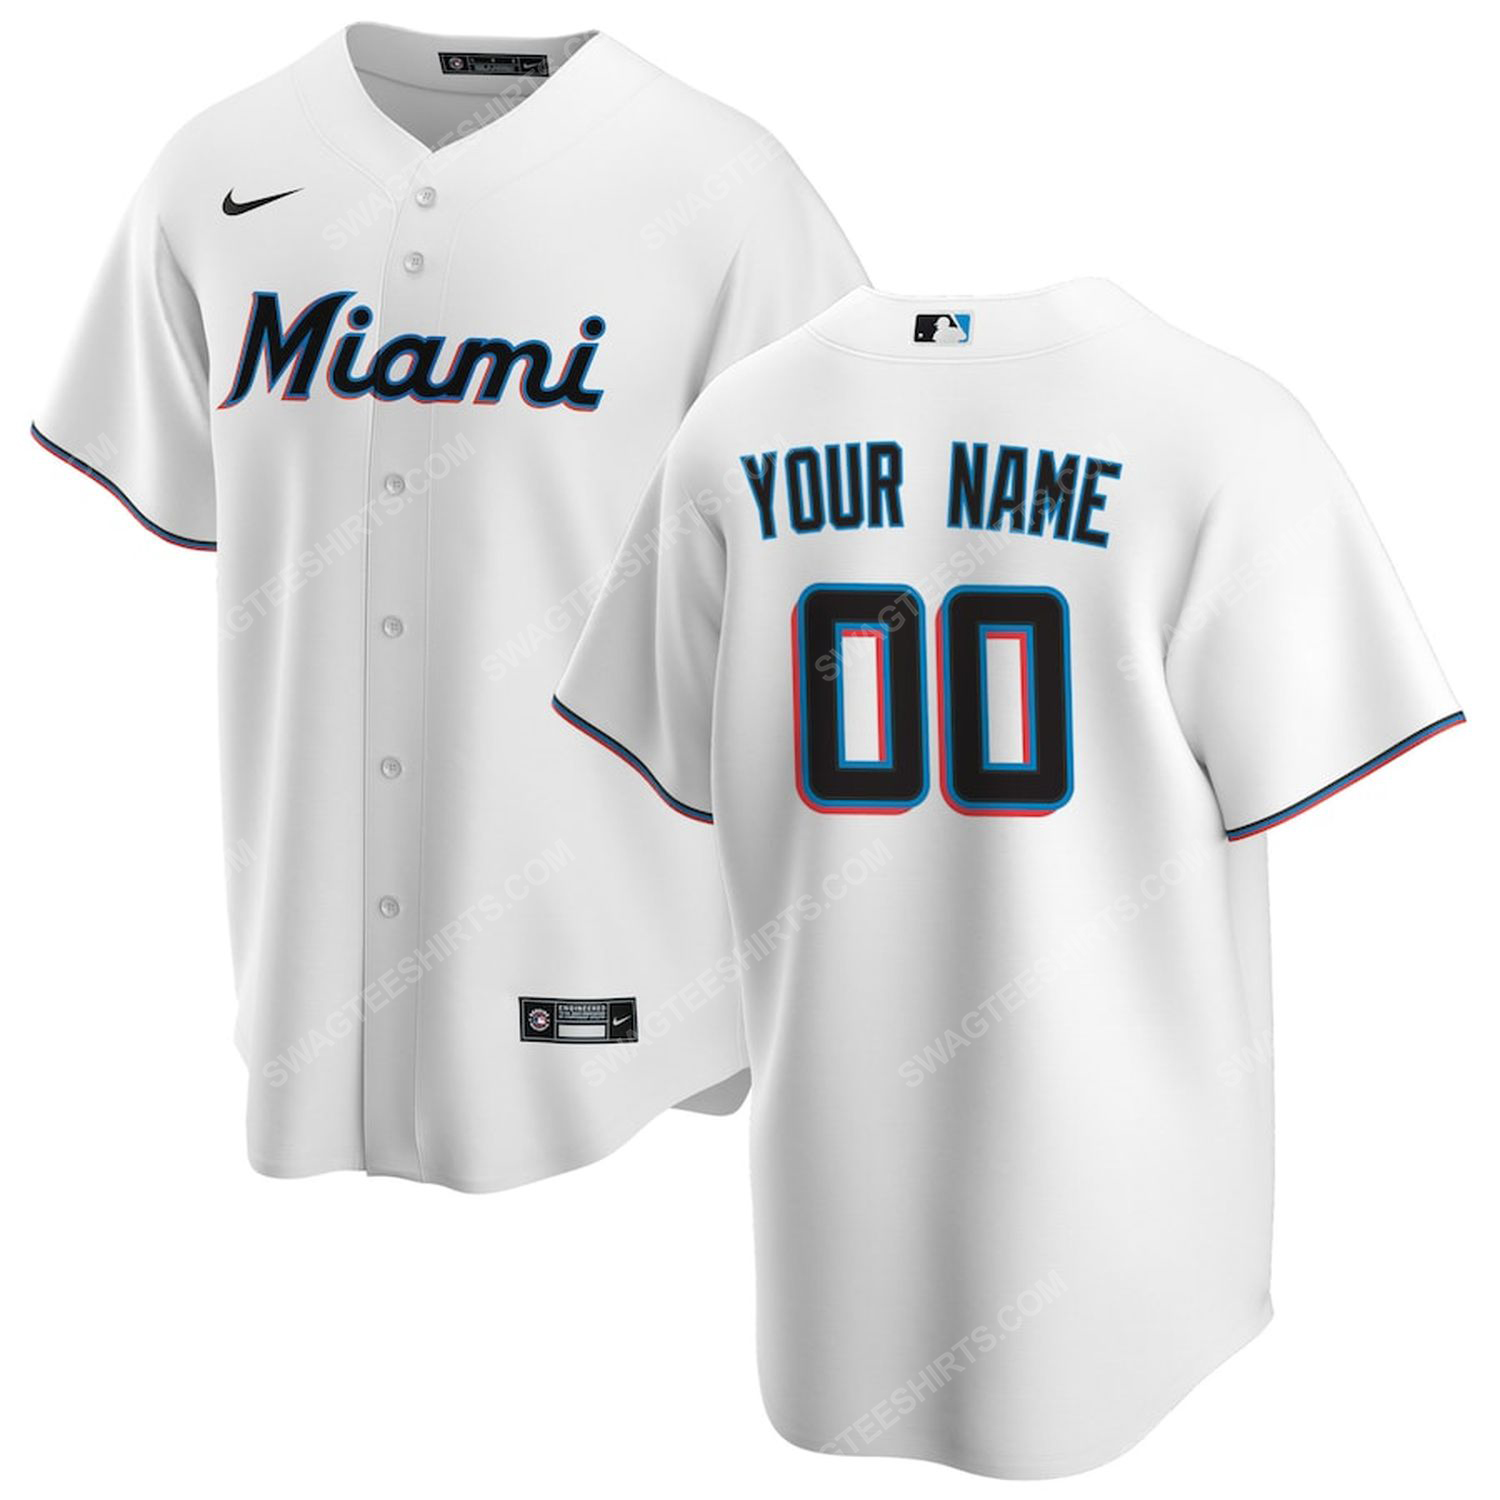 [special edition] Personalized mlb miami marlins team baseball jersey – maria